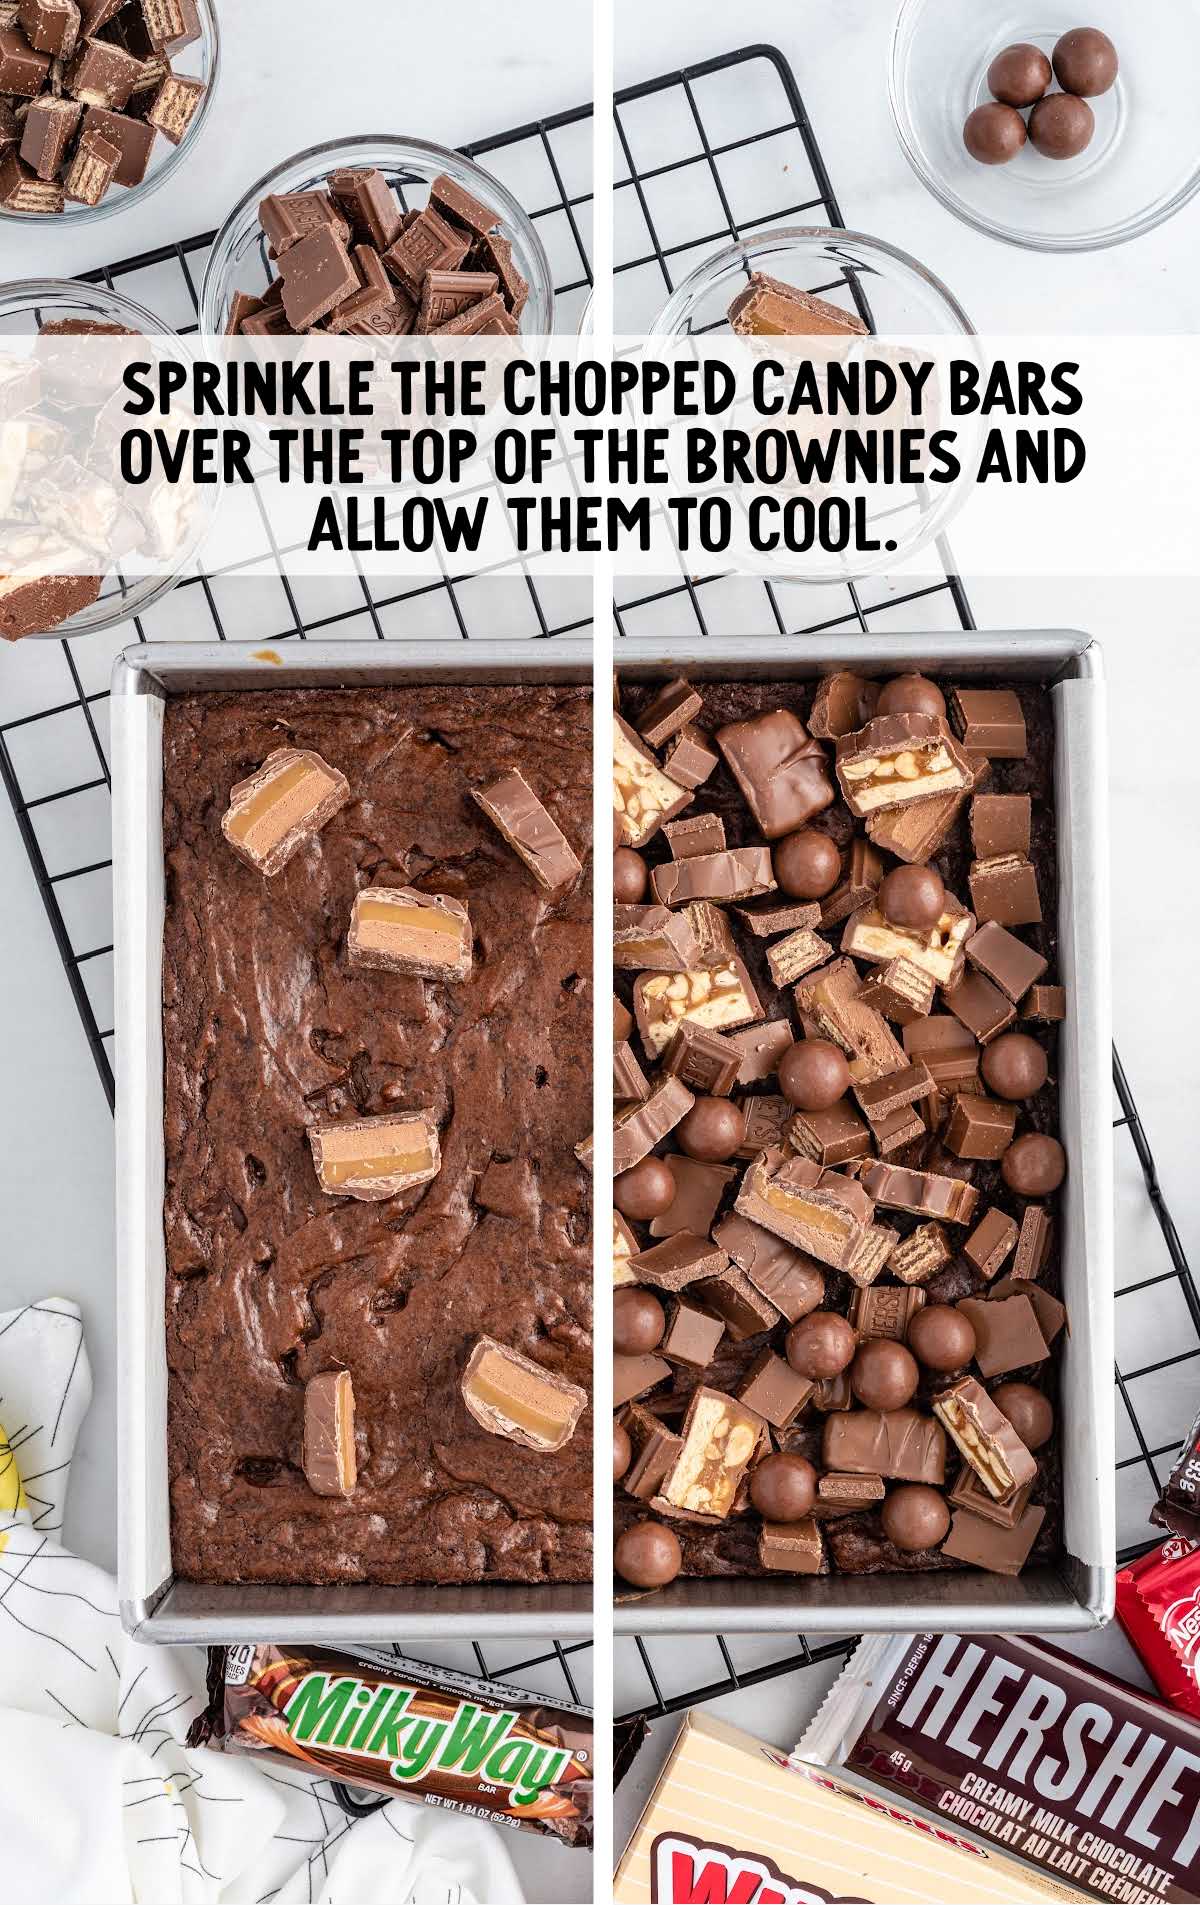 chopped candy bars sprinkled on top of the brownies in a baking dish